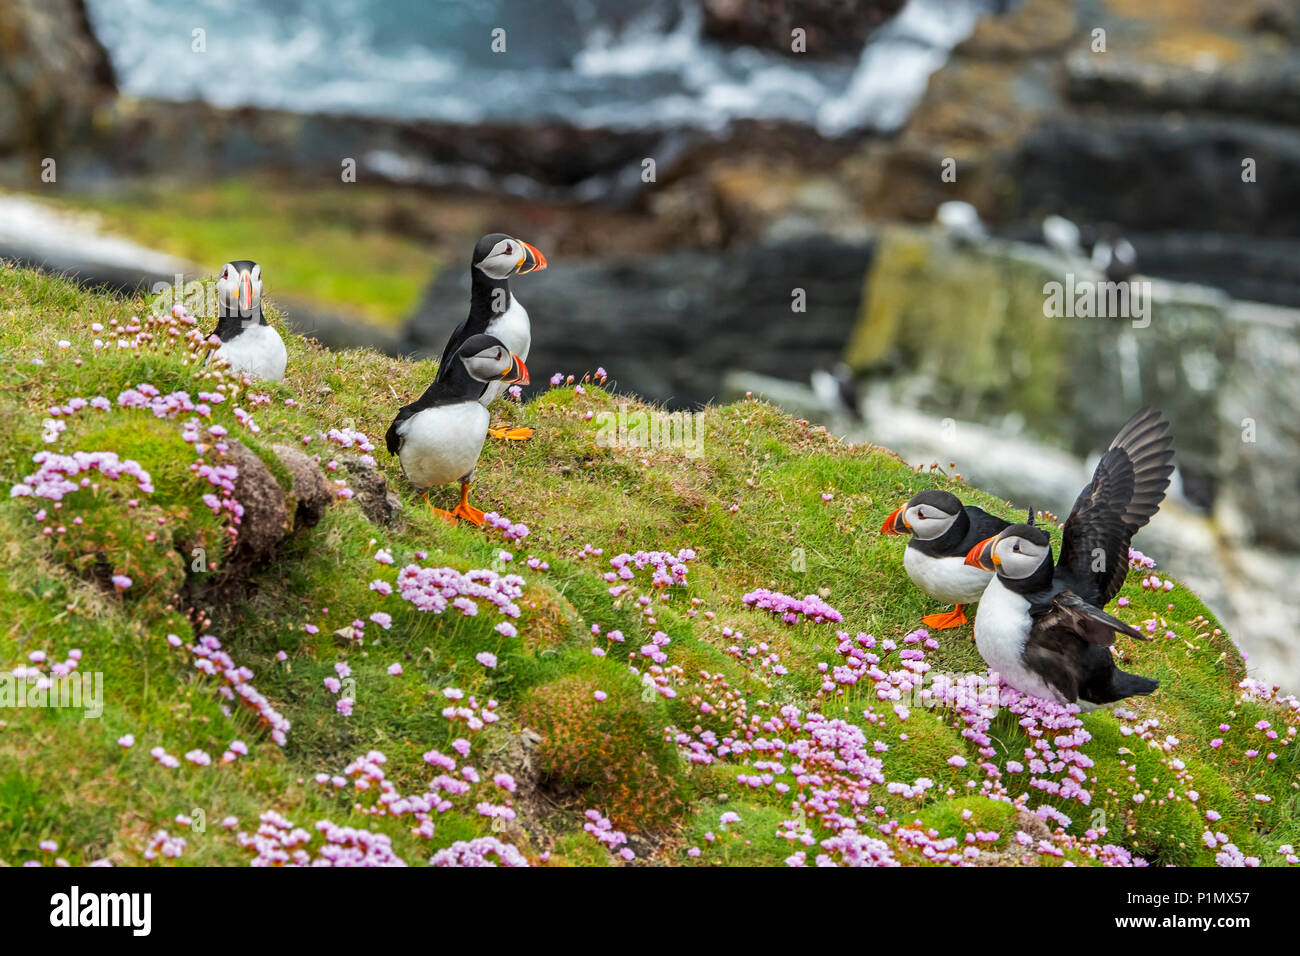 Atlantic puffins / Common puffins (Fratercula arctica) on cliff top in seabird colony at Sumburgh Head, Shetland Islands, Scotland, UK Stock Photo